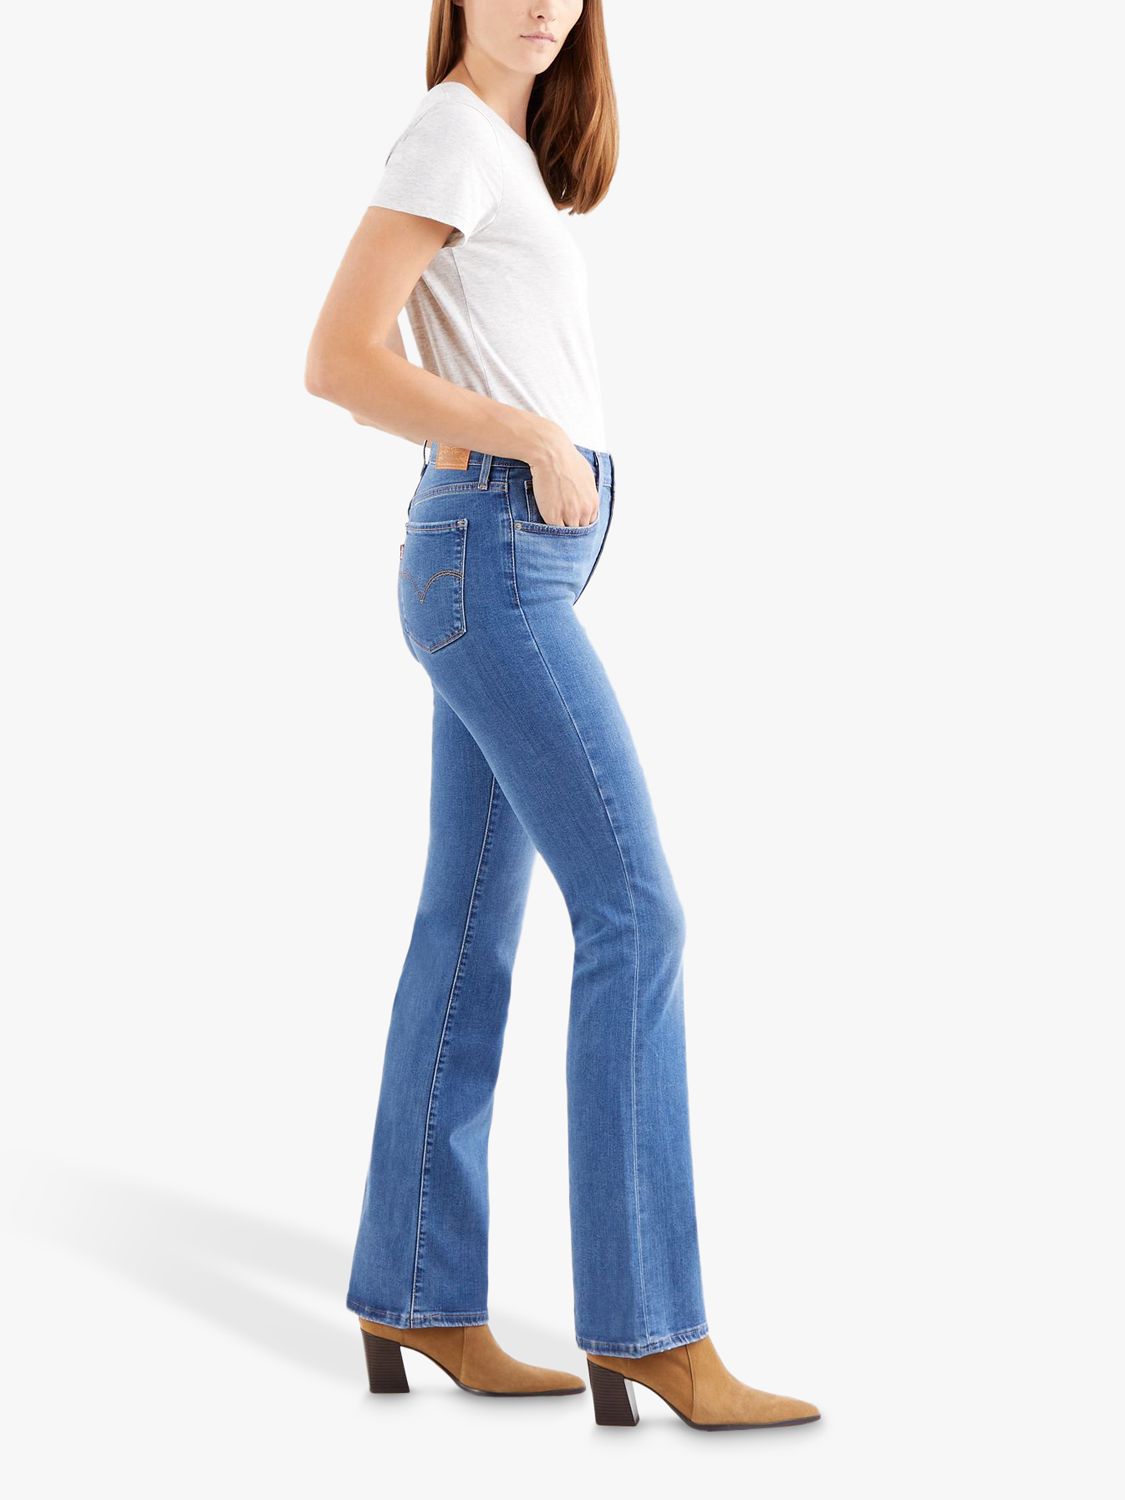 Levi's 725 High Rise Boot Cut Jeans, Rio Rave at John Lewis & Partners